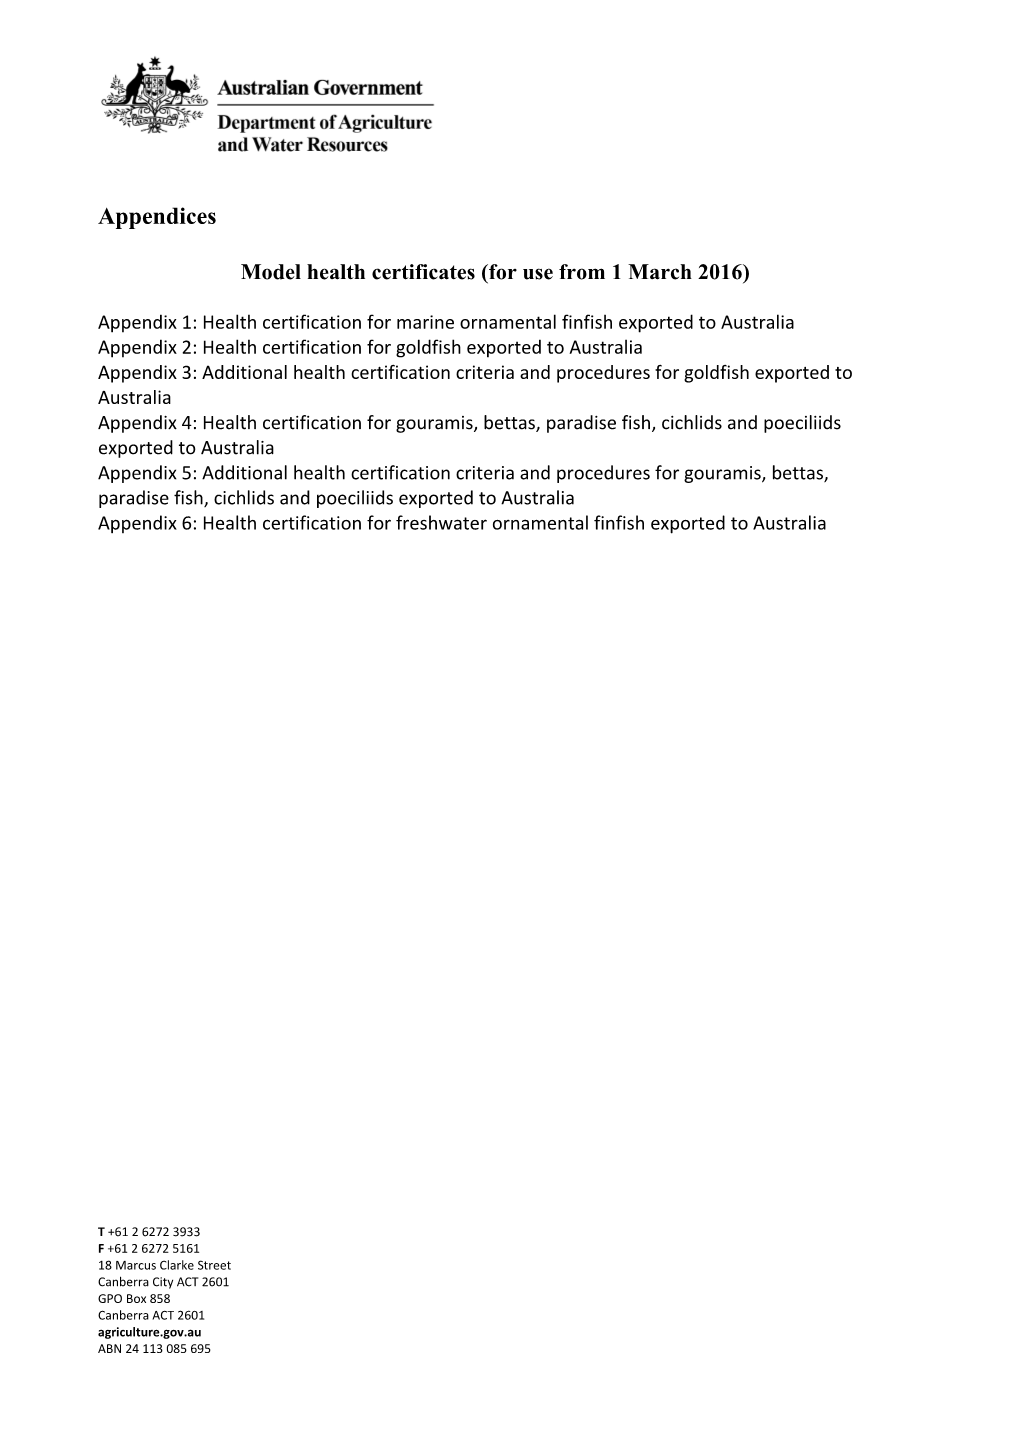 Model Health Certificates (For Use from 1 March 2016)